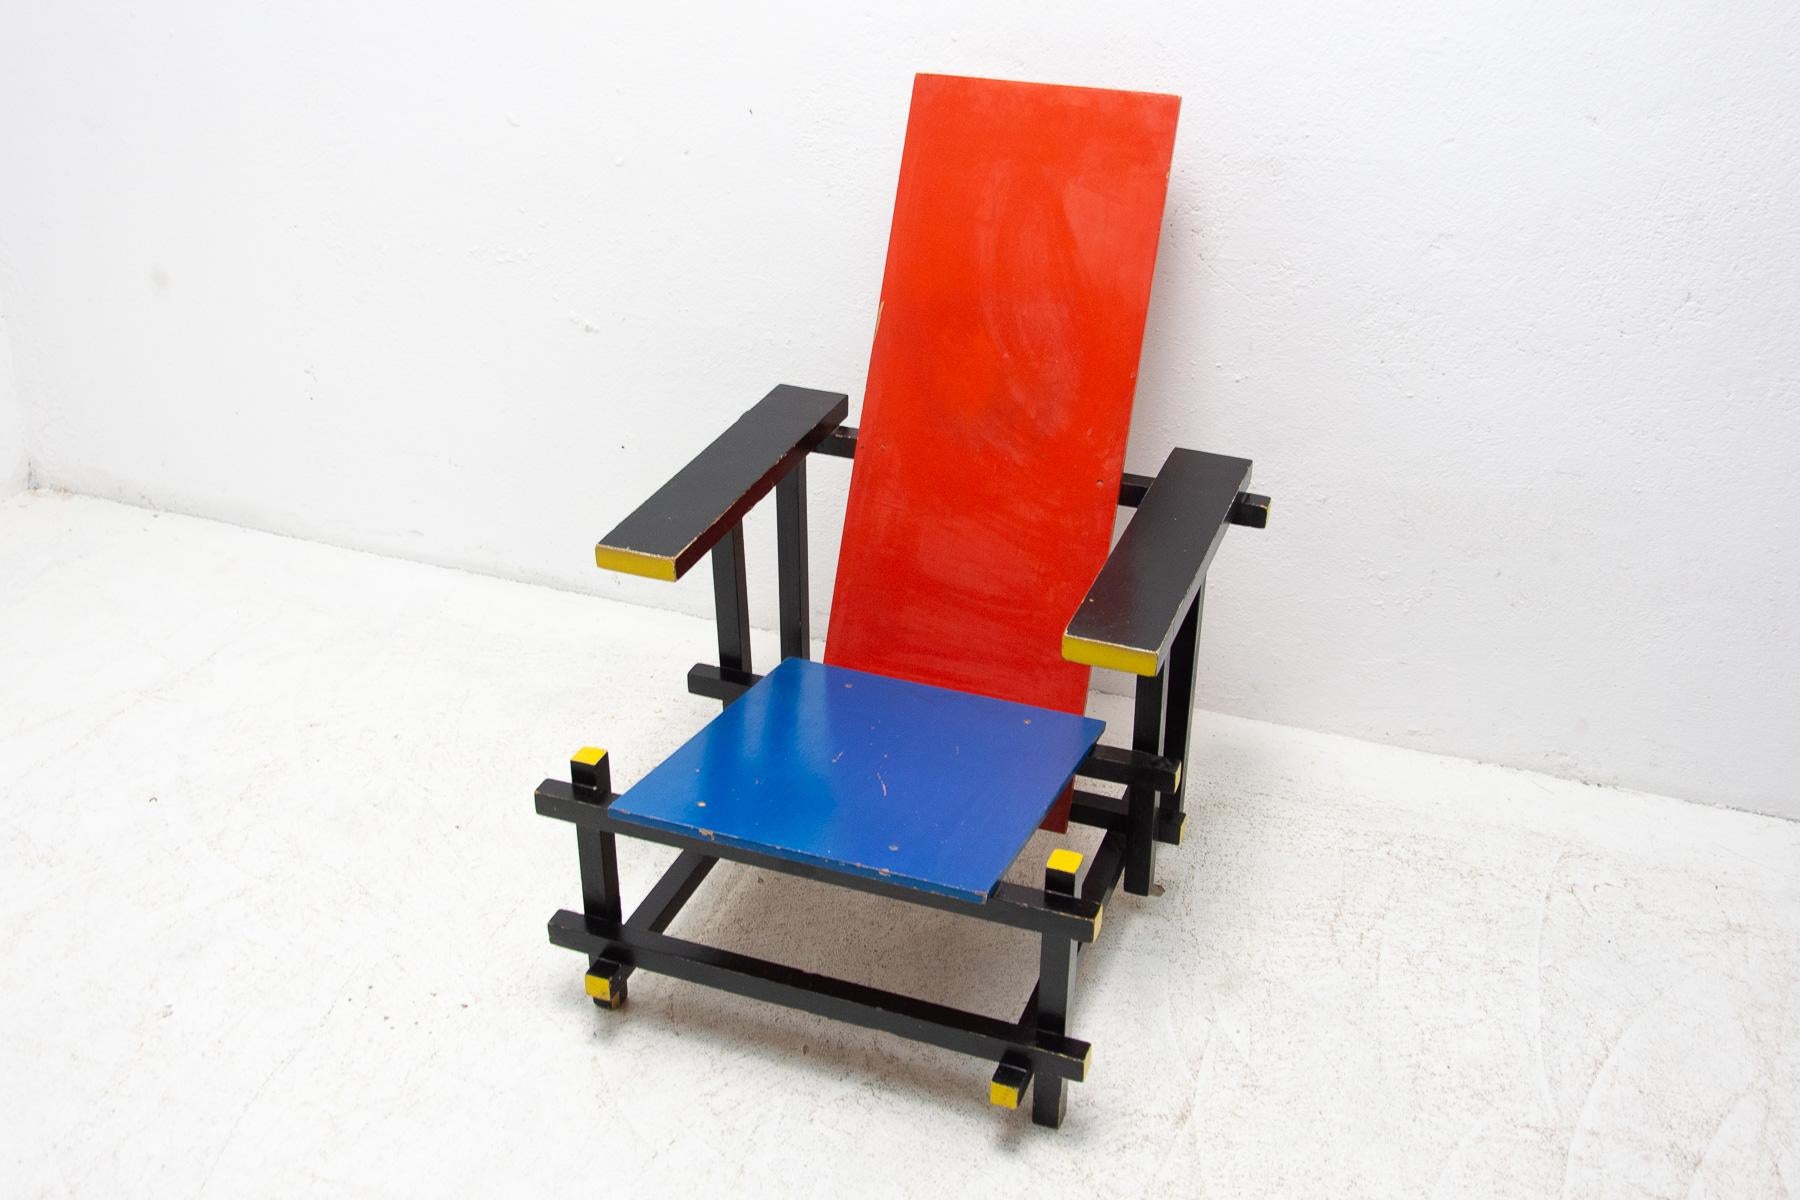 This Iconic chair was originaly designed in 1918 by Gerrit Rietveld. This item was made probably in 1970. It´s made of plywood, polychrome lacquered, minor scratches, generaly in good Vintage condition

Dimensions: Height: 88 cm, width: 60 cm,